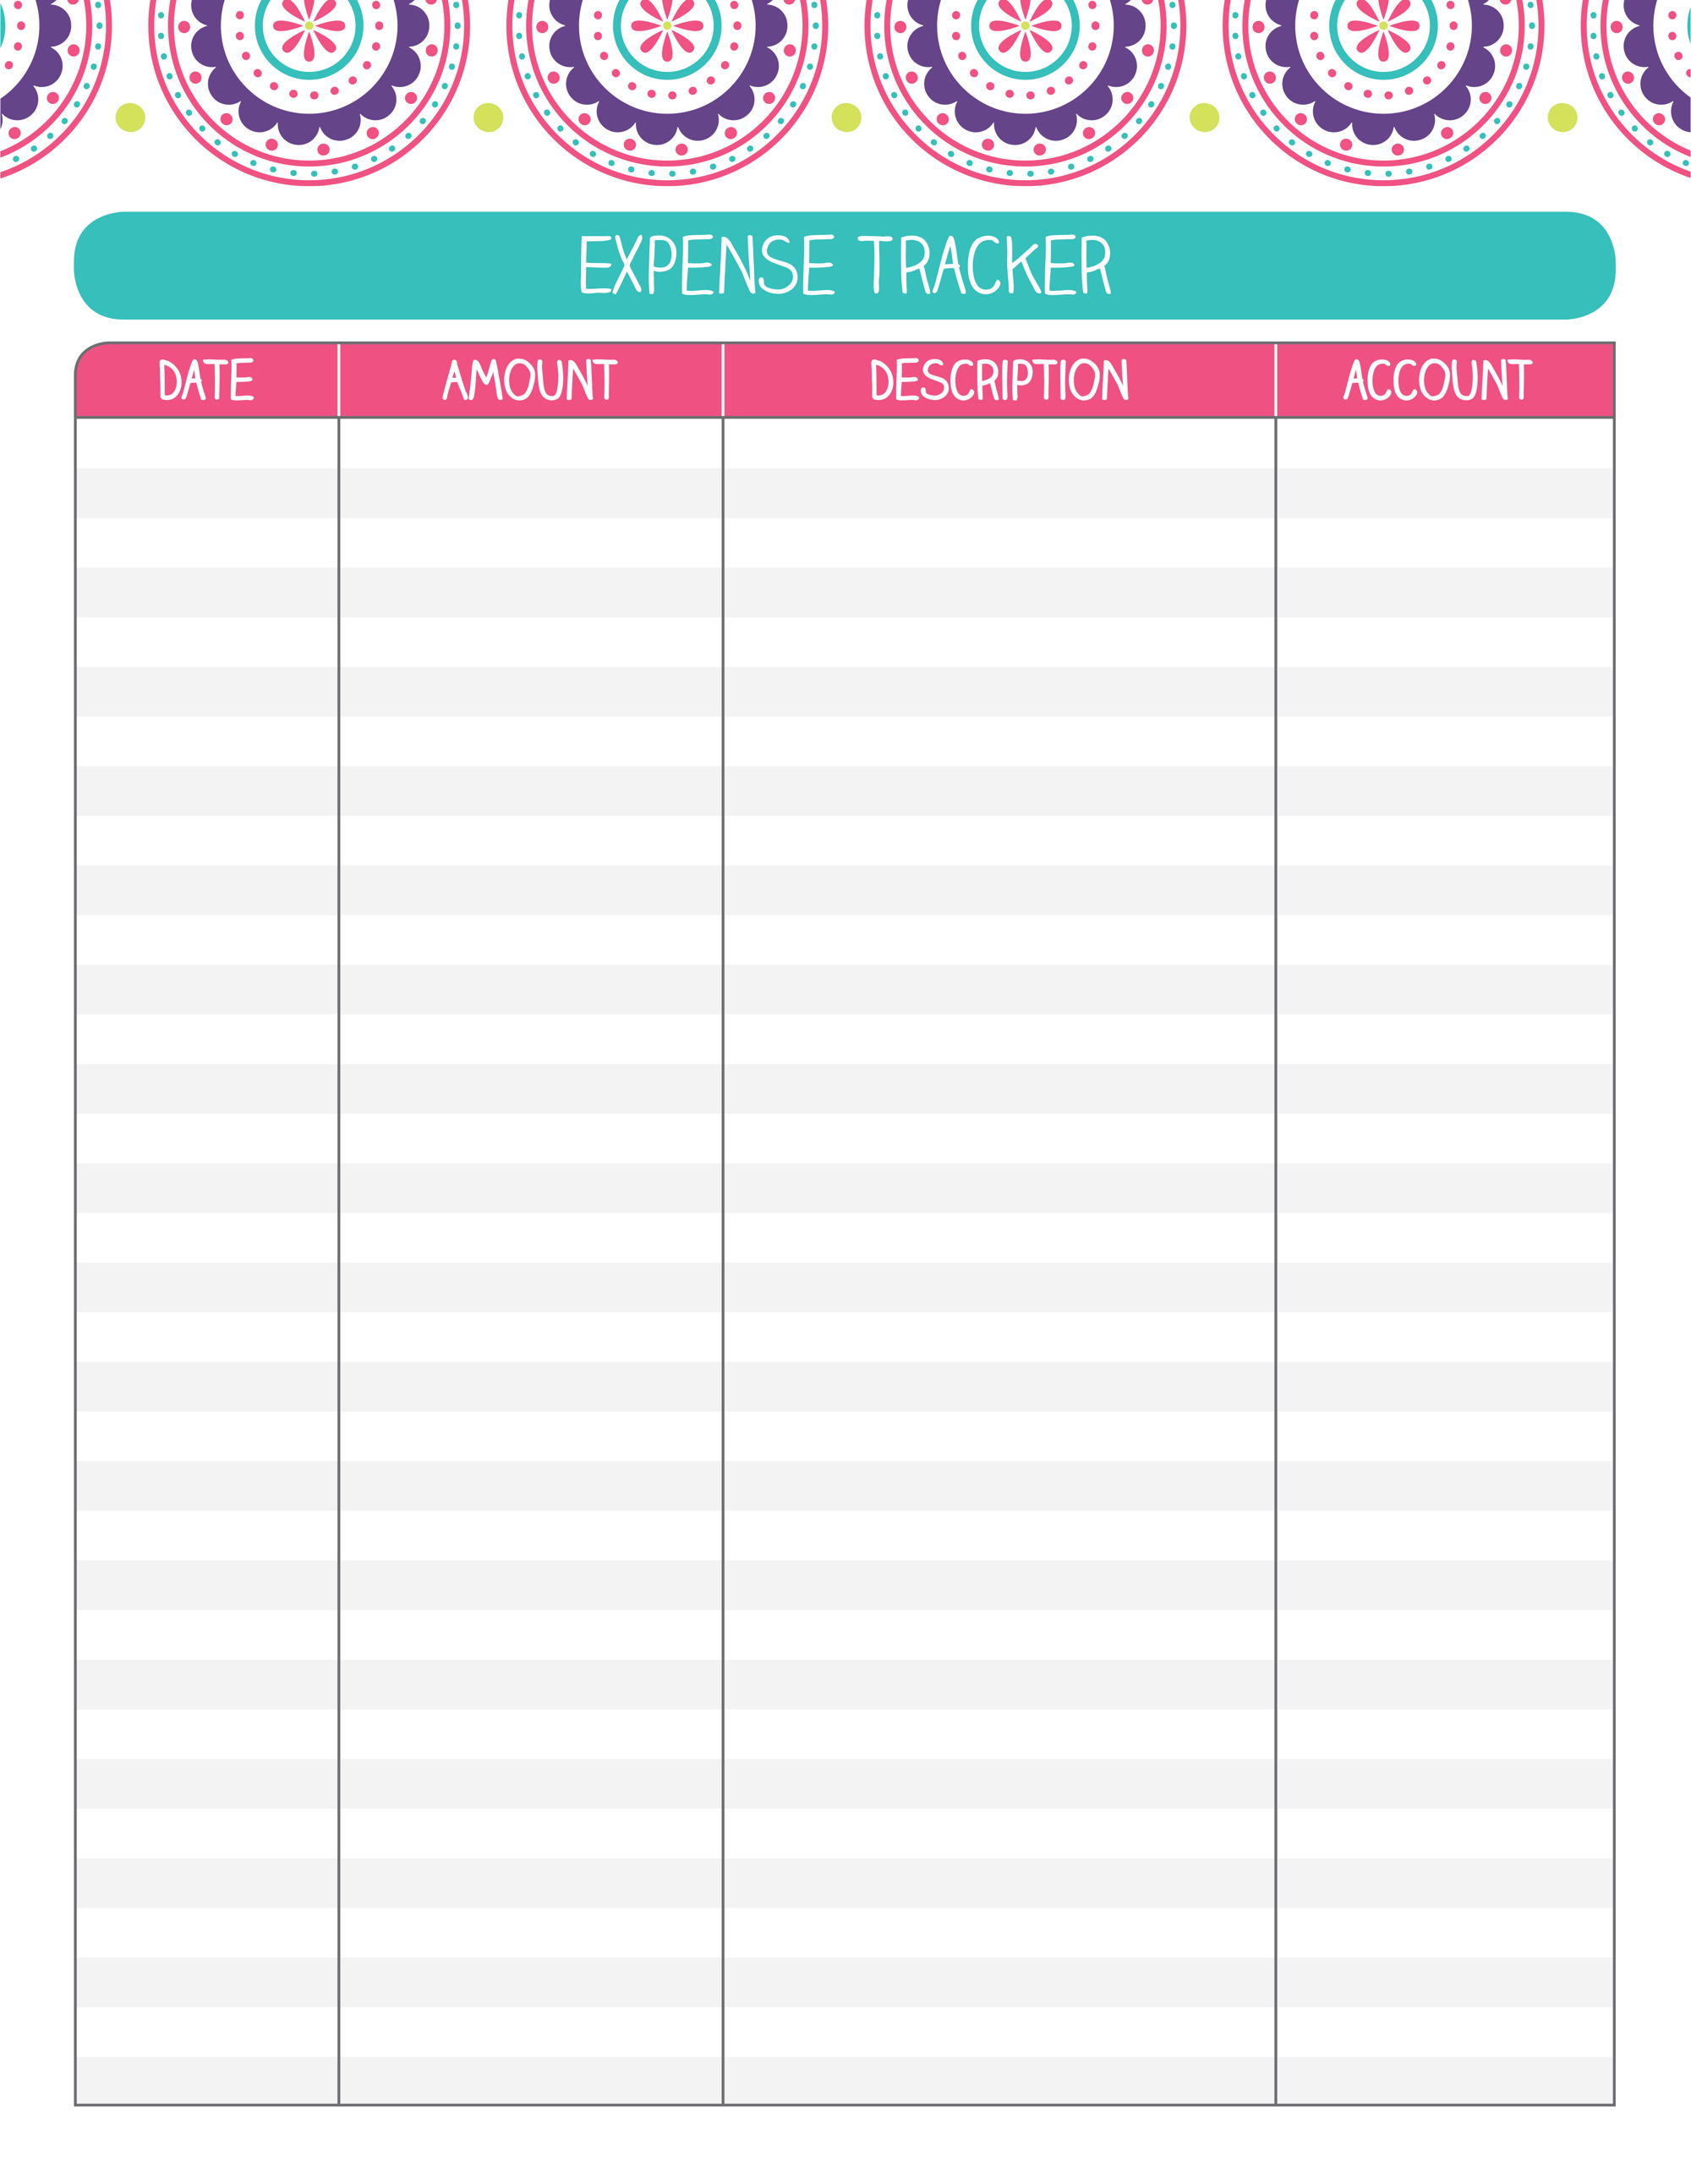 printables-bloom-daily-planners